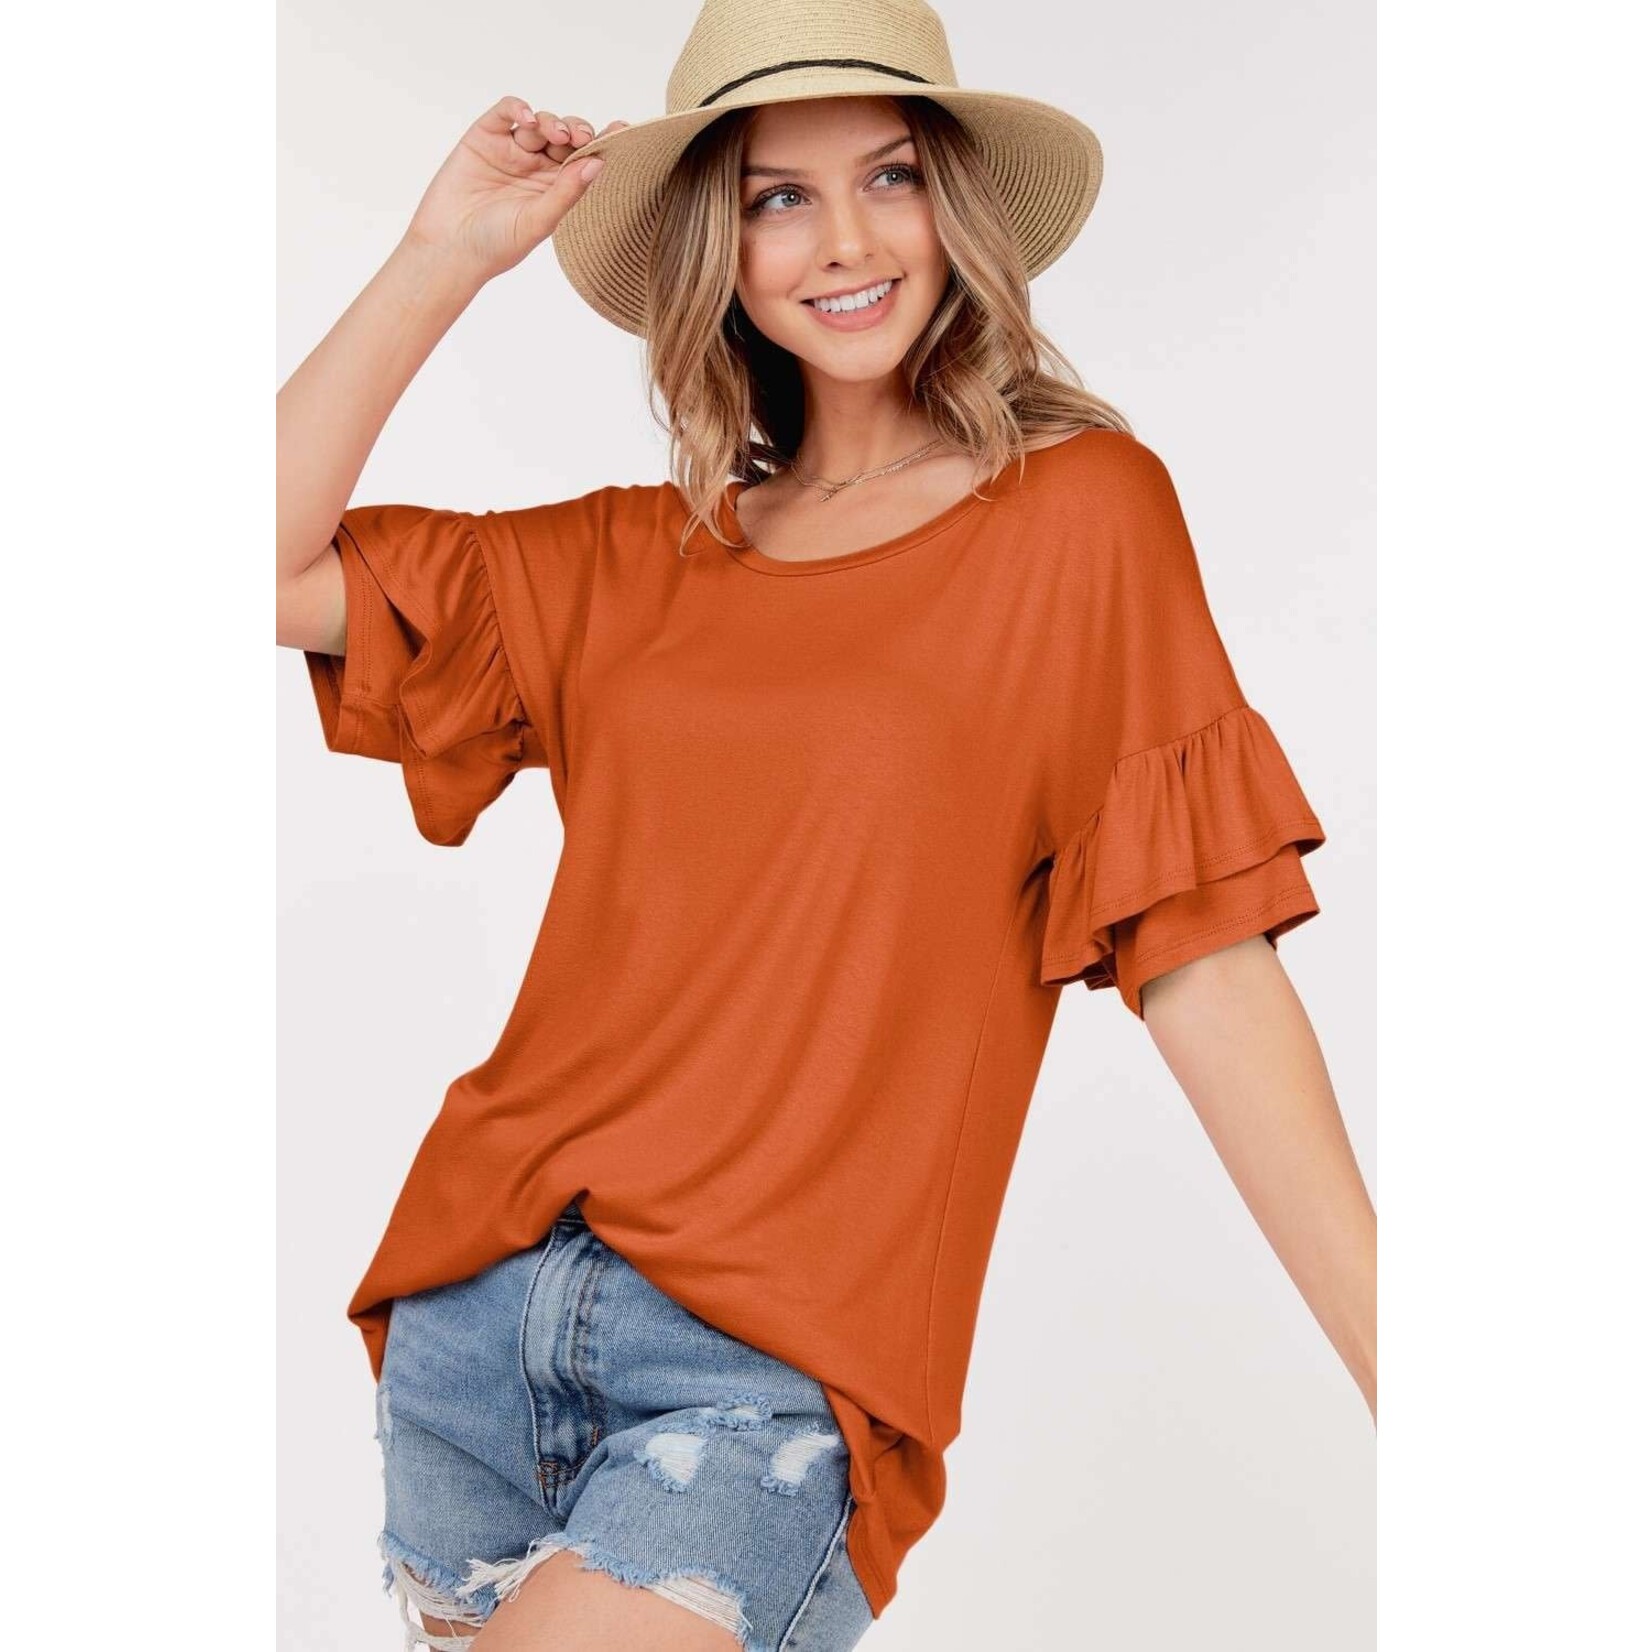 Shop Basic USA Knit Top With Short Ruffle Sleeves and Round Neck